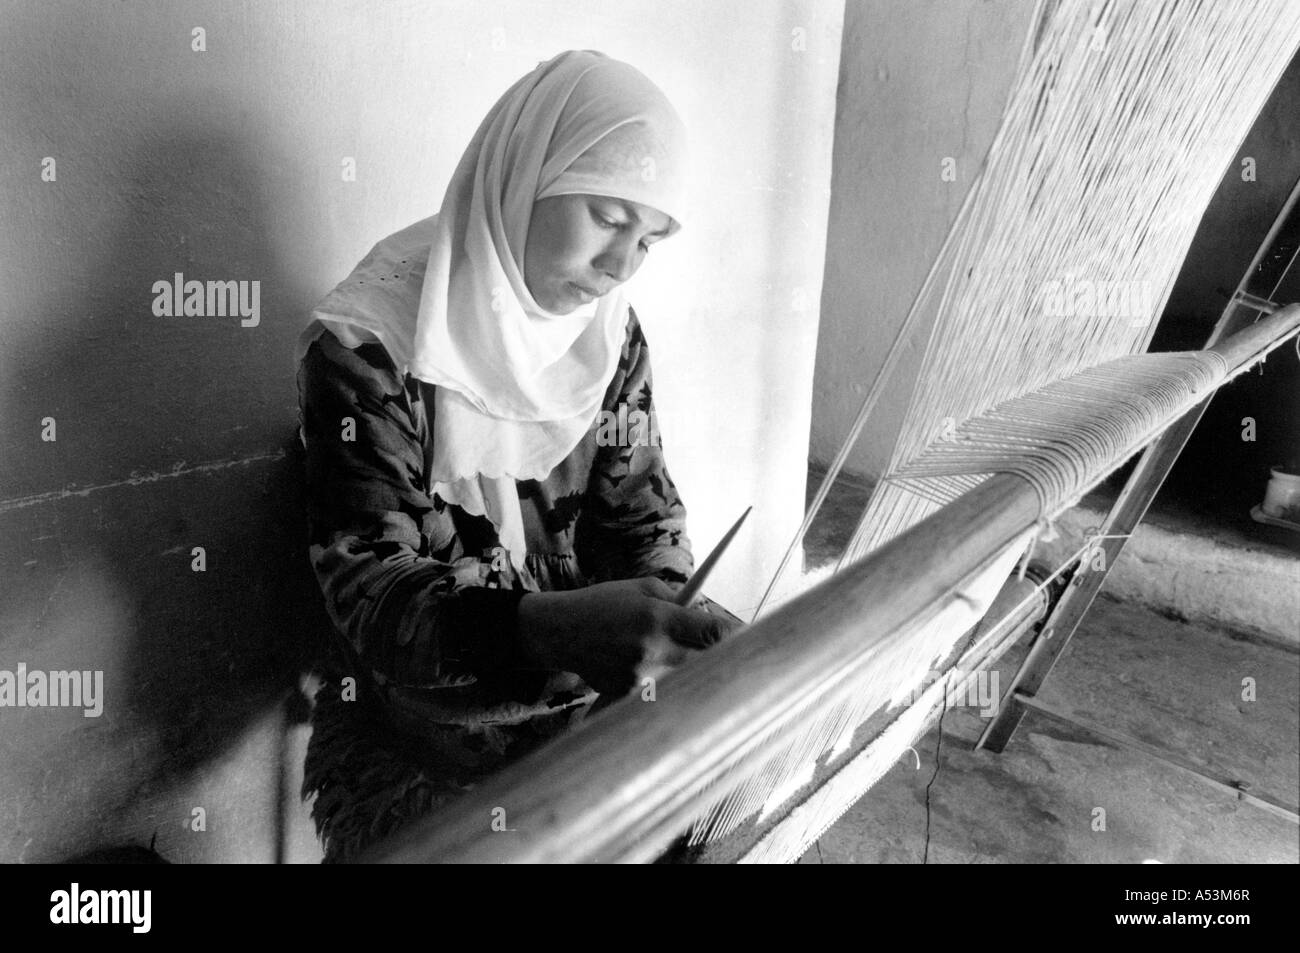 Painet ha1374 183 black and white clabor woman weaving loom magdi tunisia country developing nation less economically Stock Photo